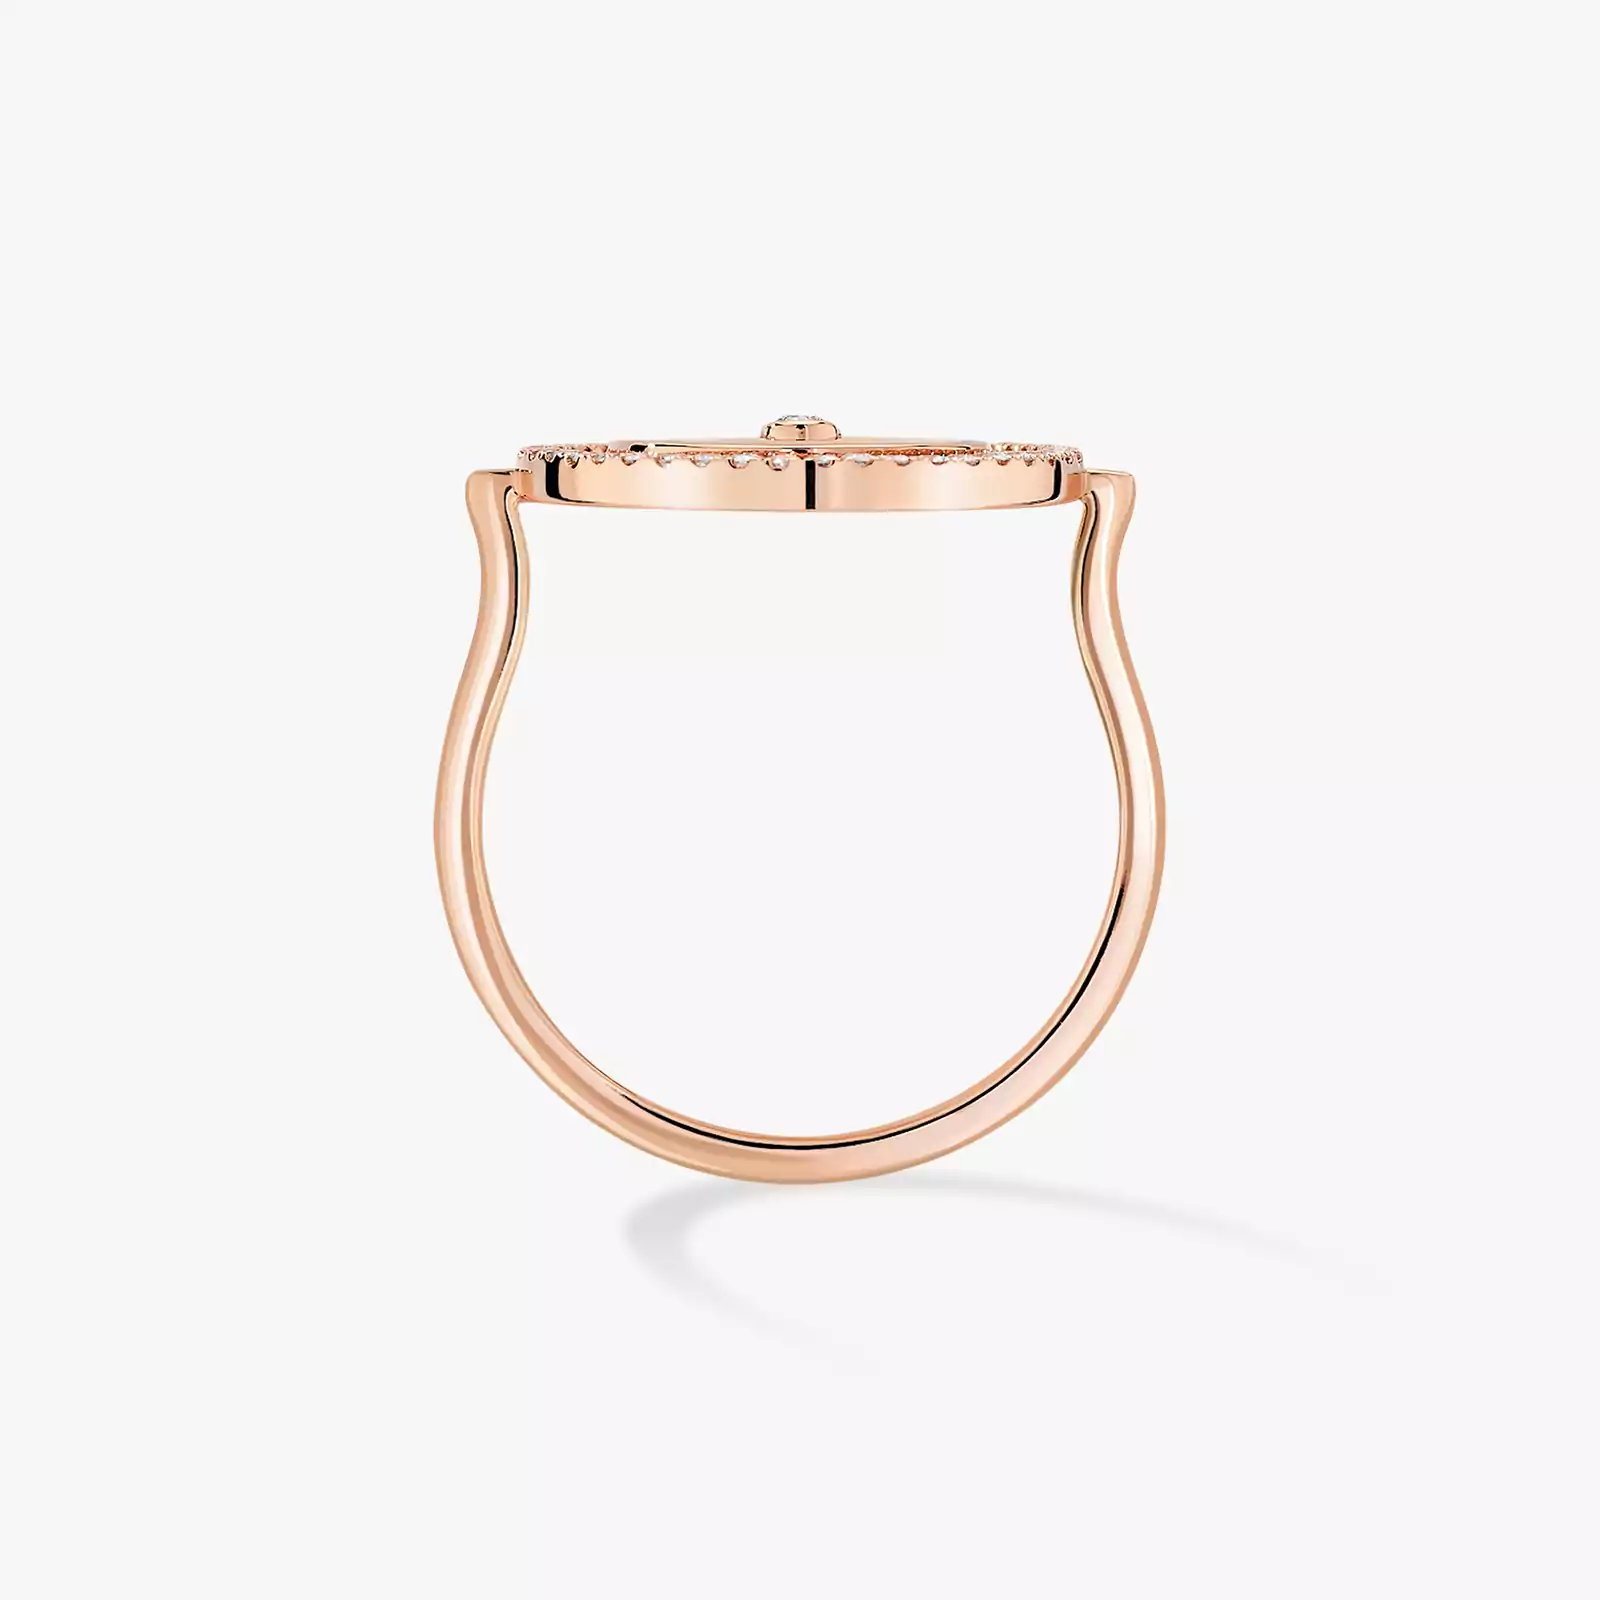 Ring For Her Pink Gold Diamond Lucky Move SM 07470-PG